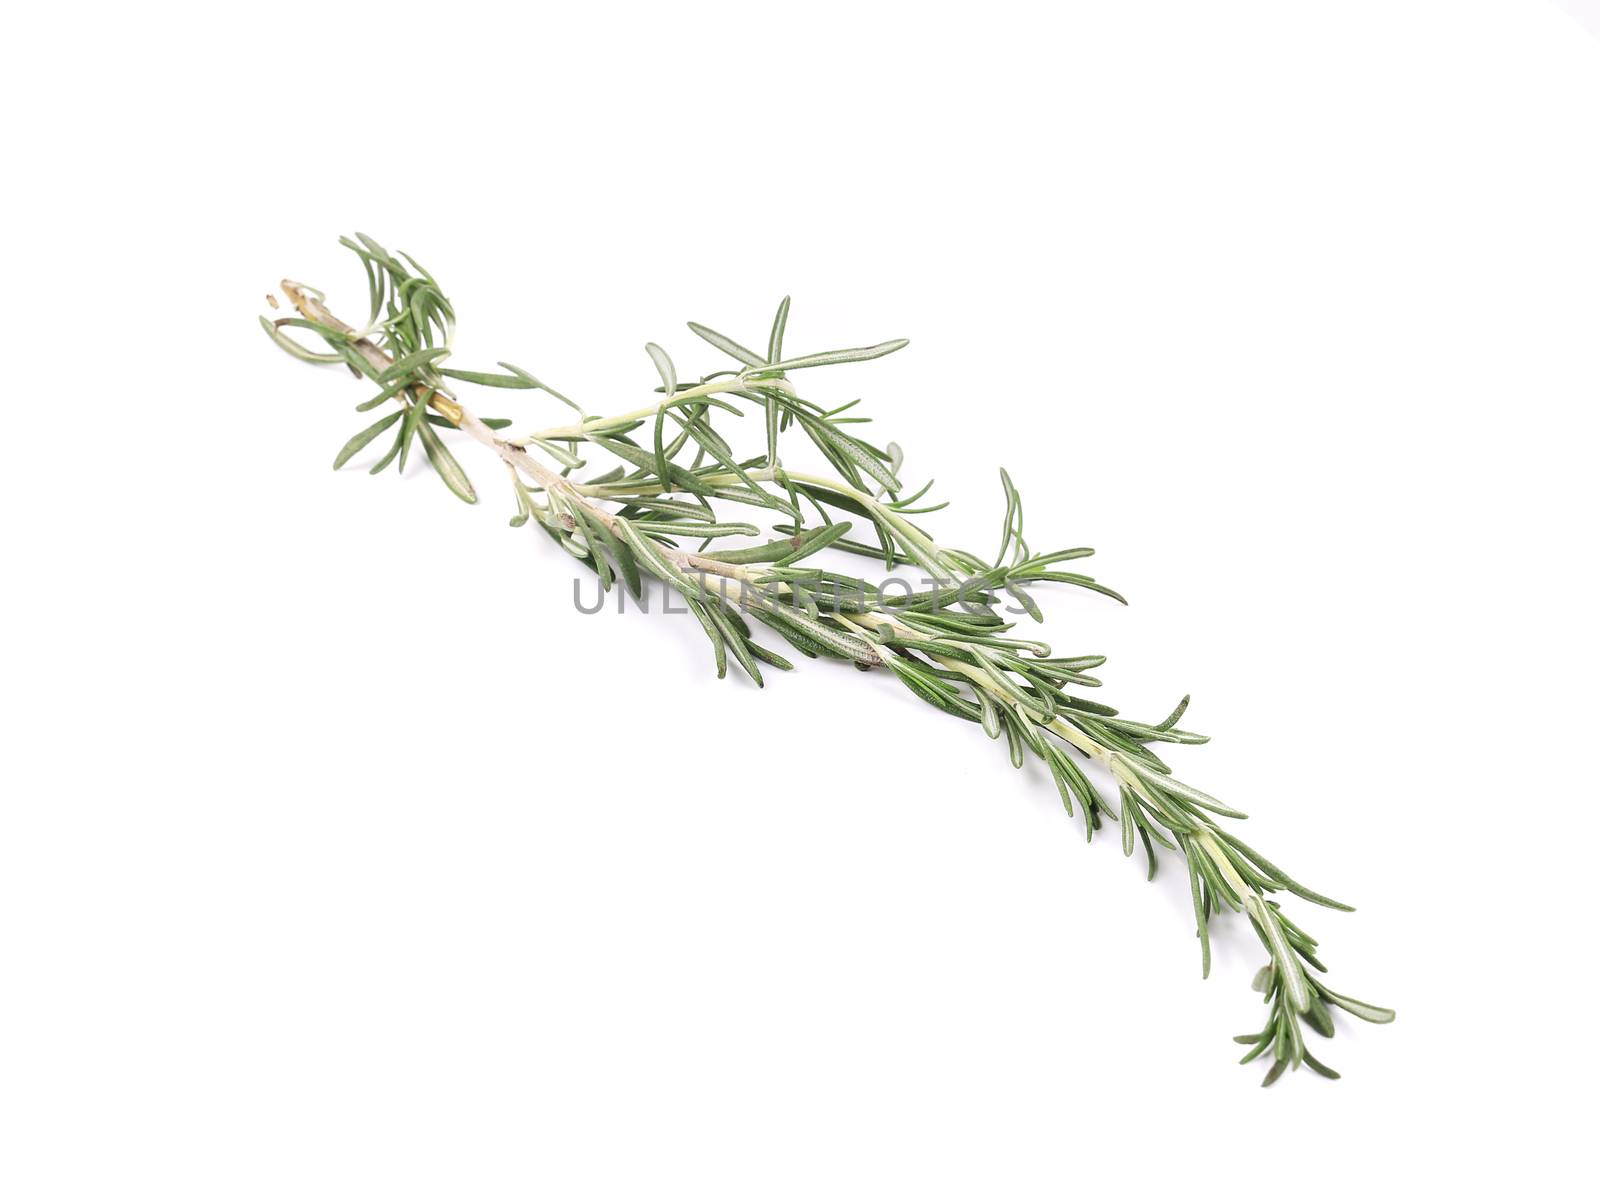 Twig of rosemary. Isolated on a white background.